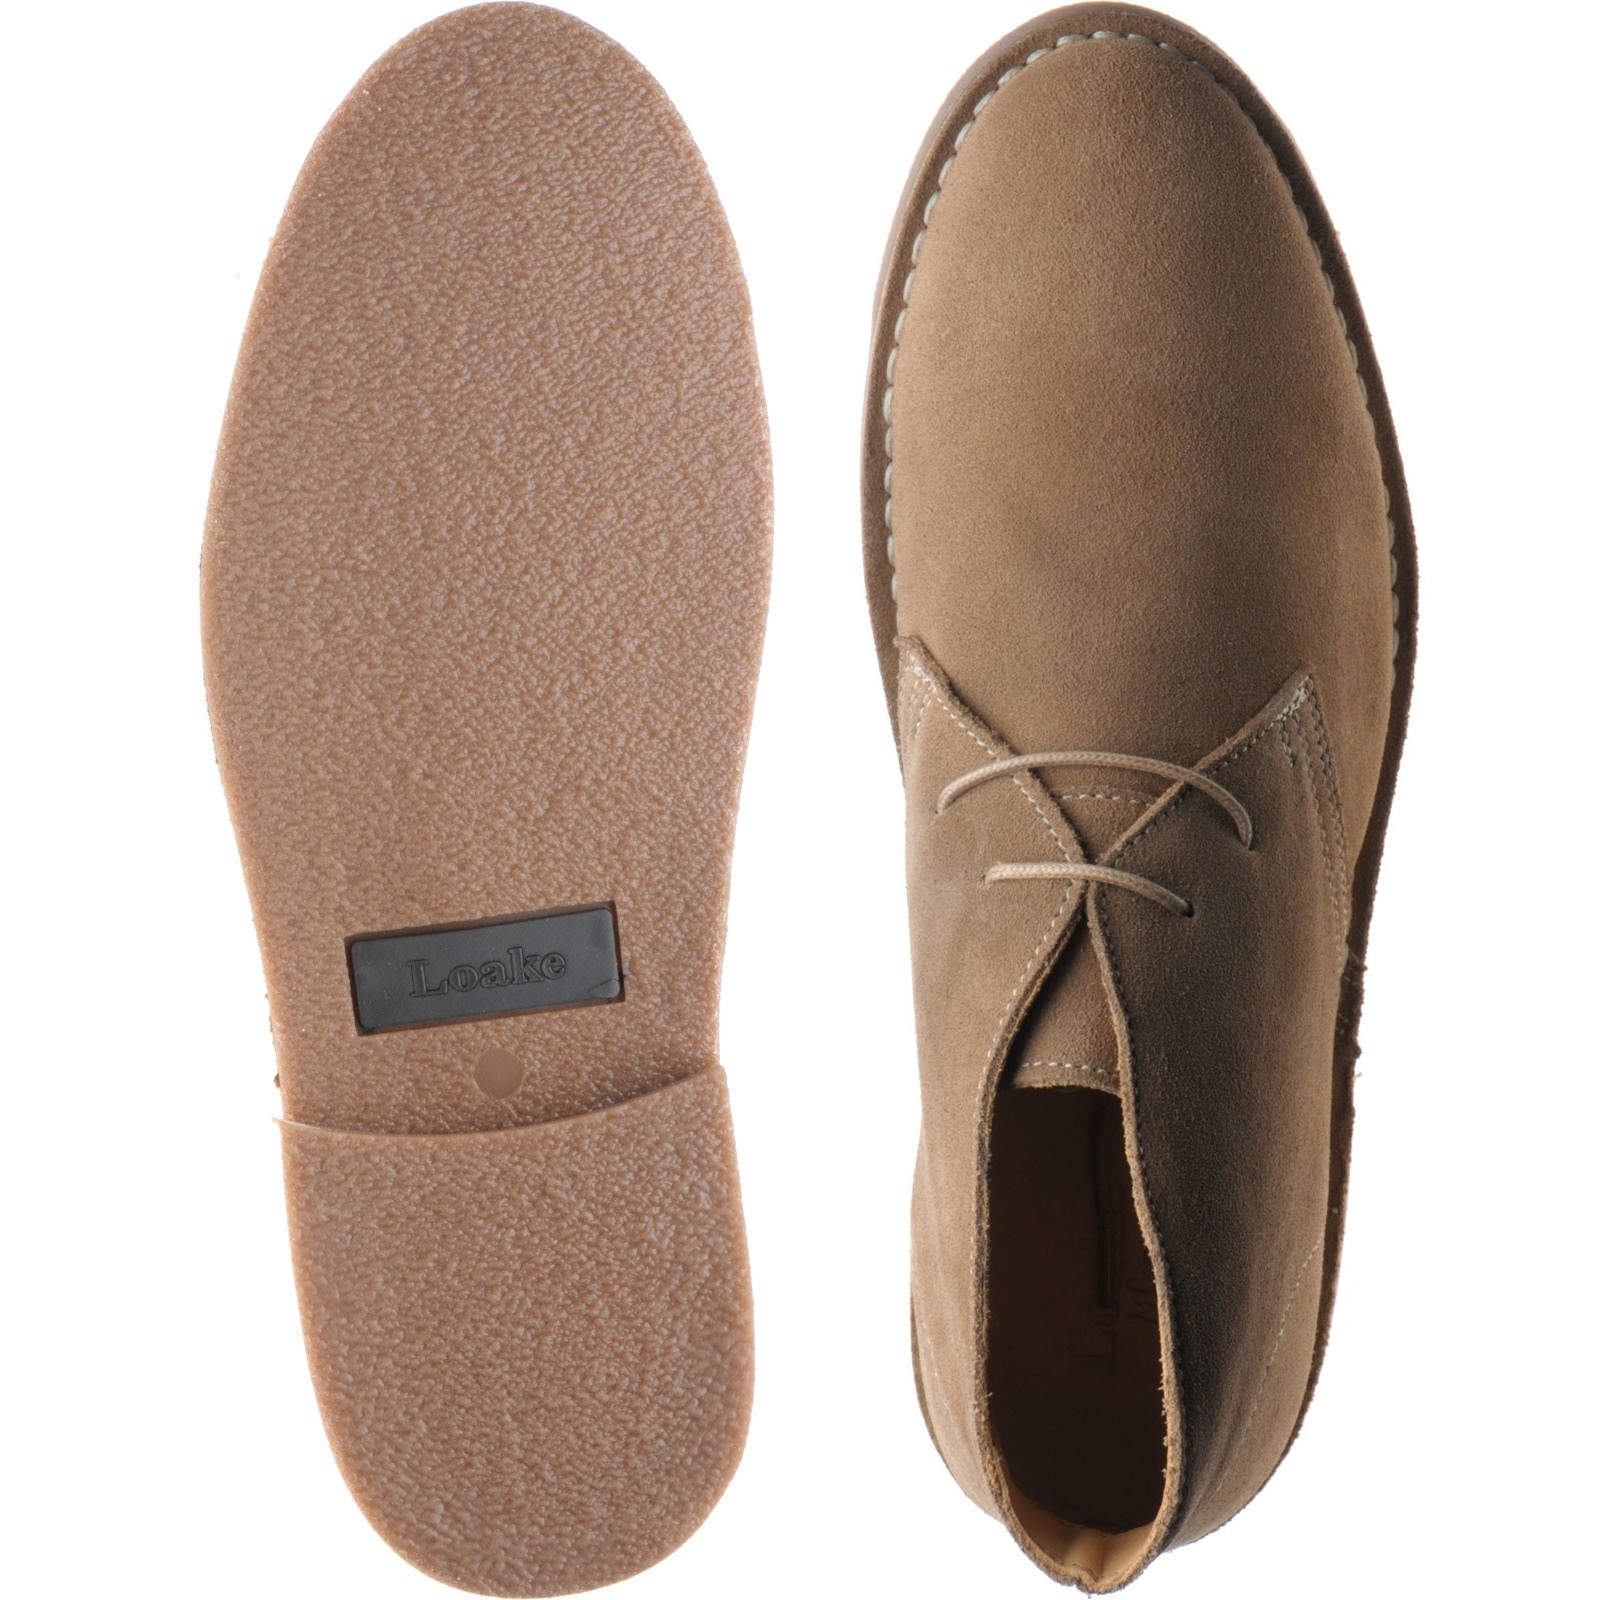 Loake shoes | Loake Lifestyle | Sahara rubber-soled Chukka boots in Tan ...